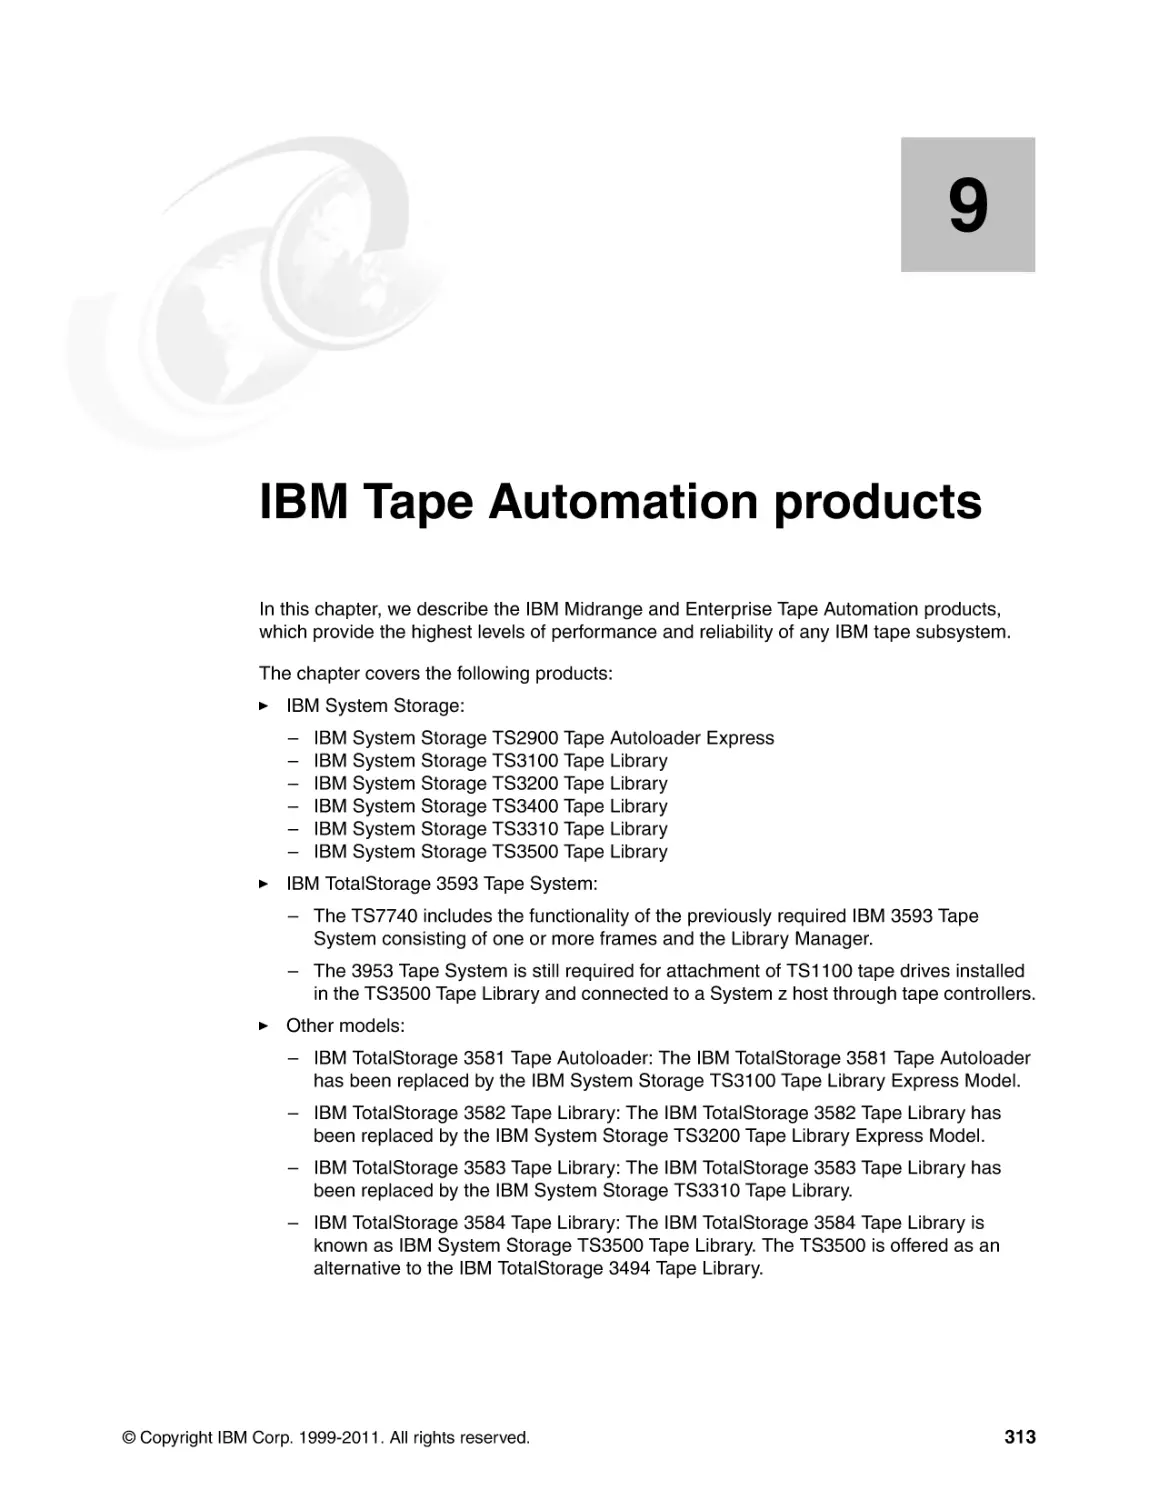 Chapter 9. IBM Tape Automation products